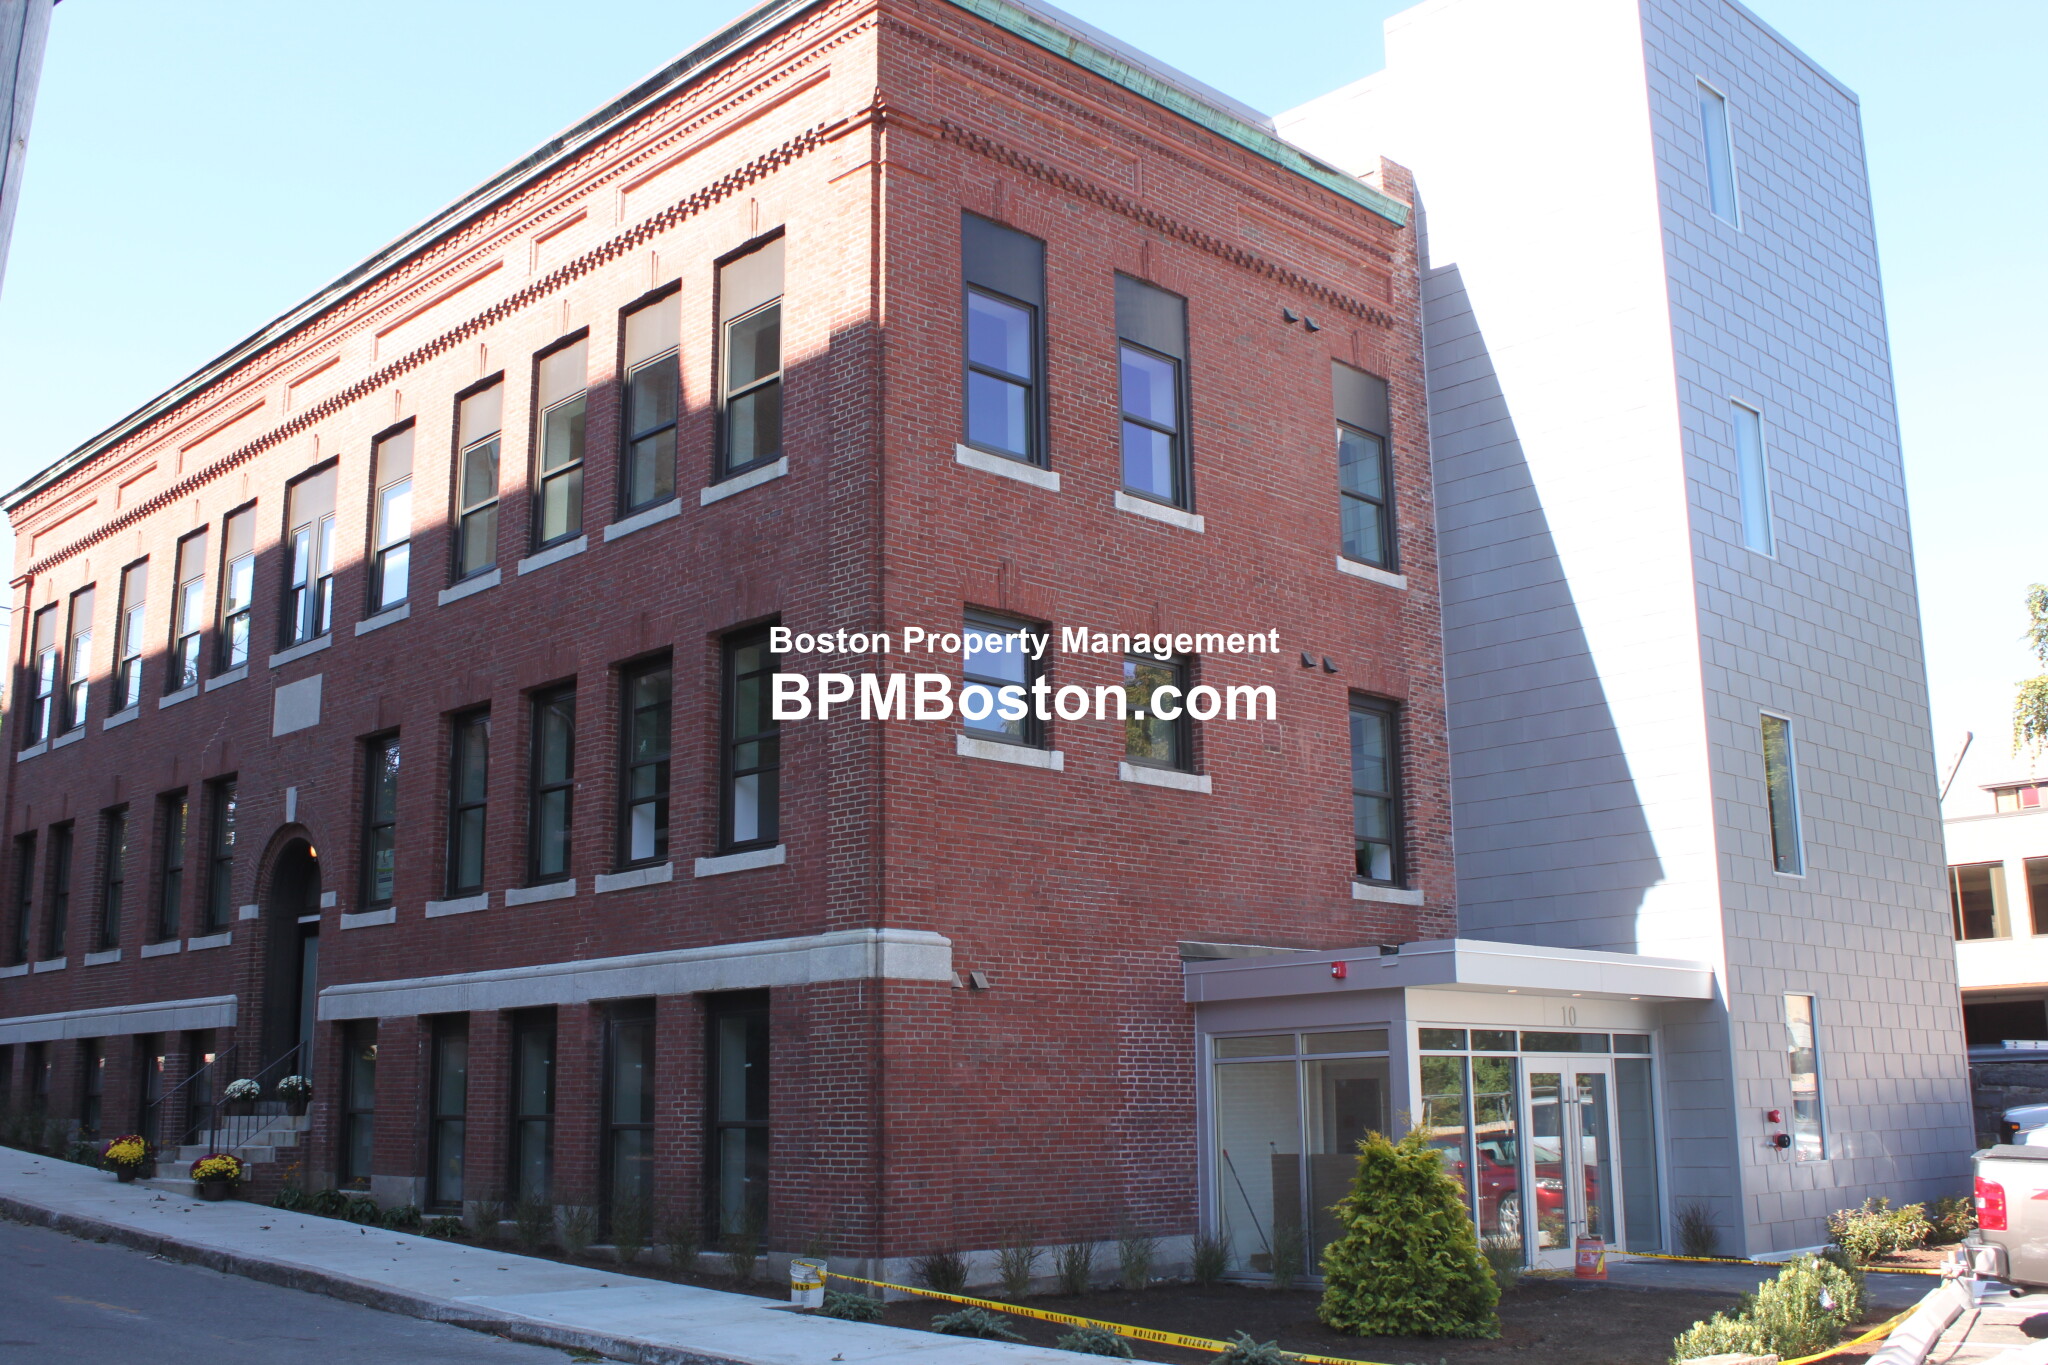 Photos of apartment on Merrymount,Quincy MA 02169